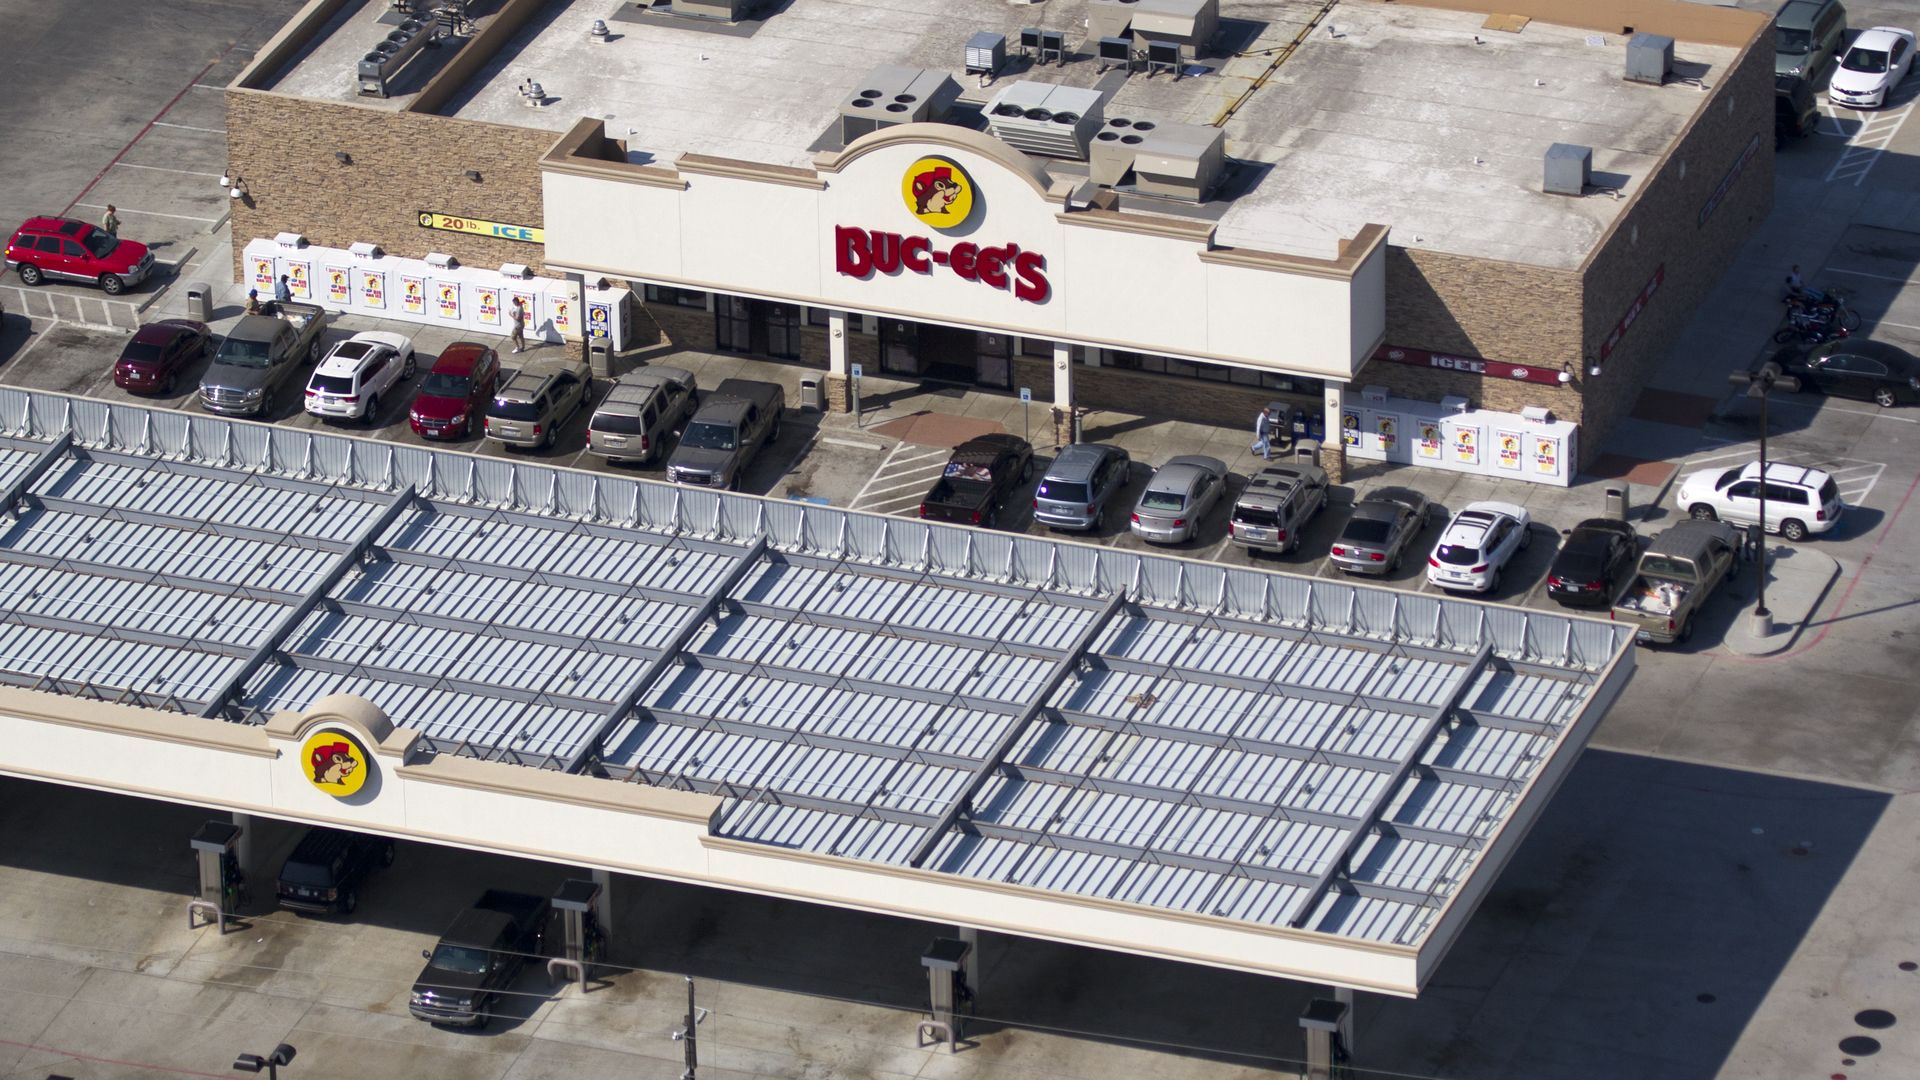 An overhead view of a Buc-ees gas station and convenience store. 